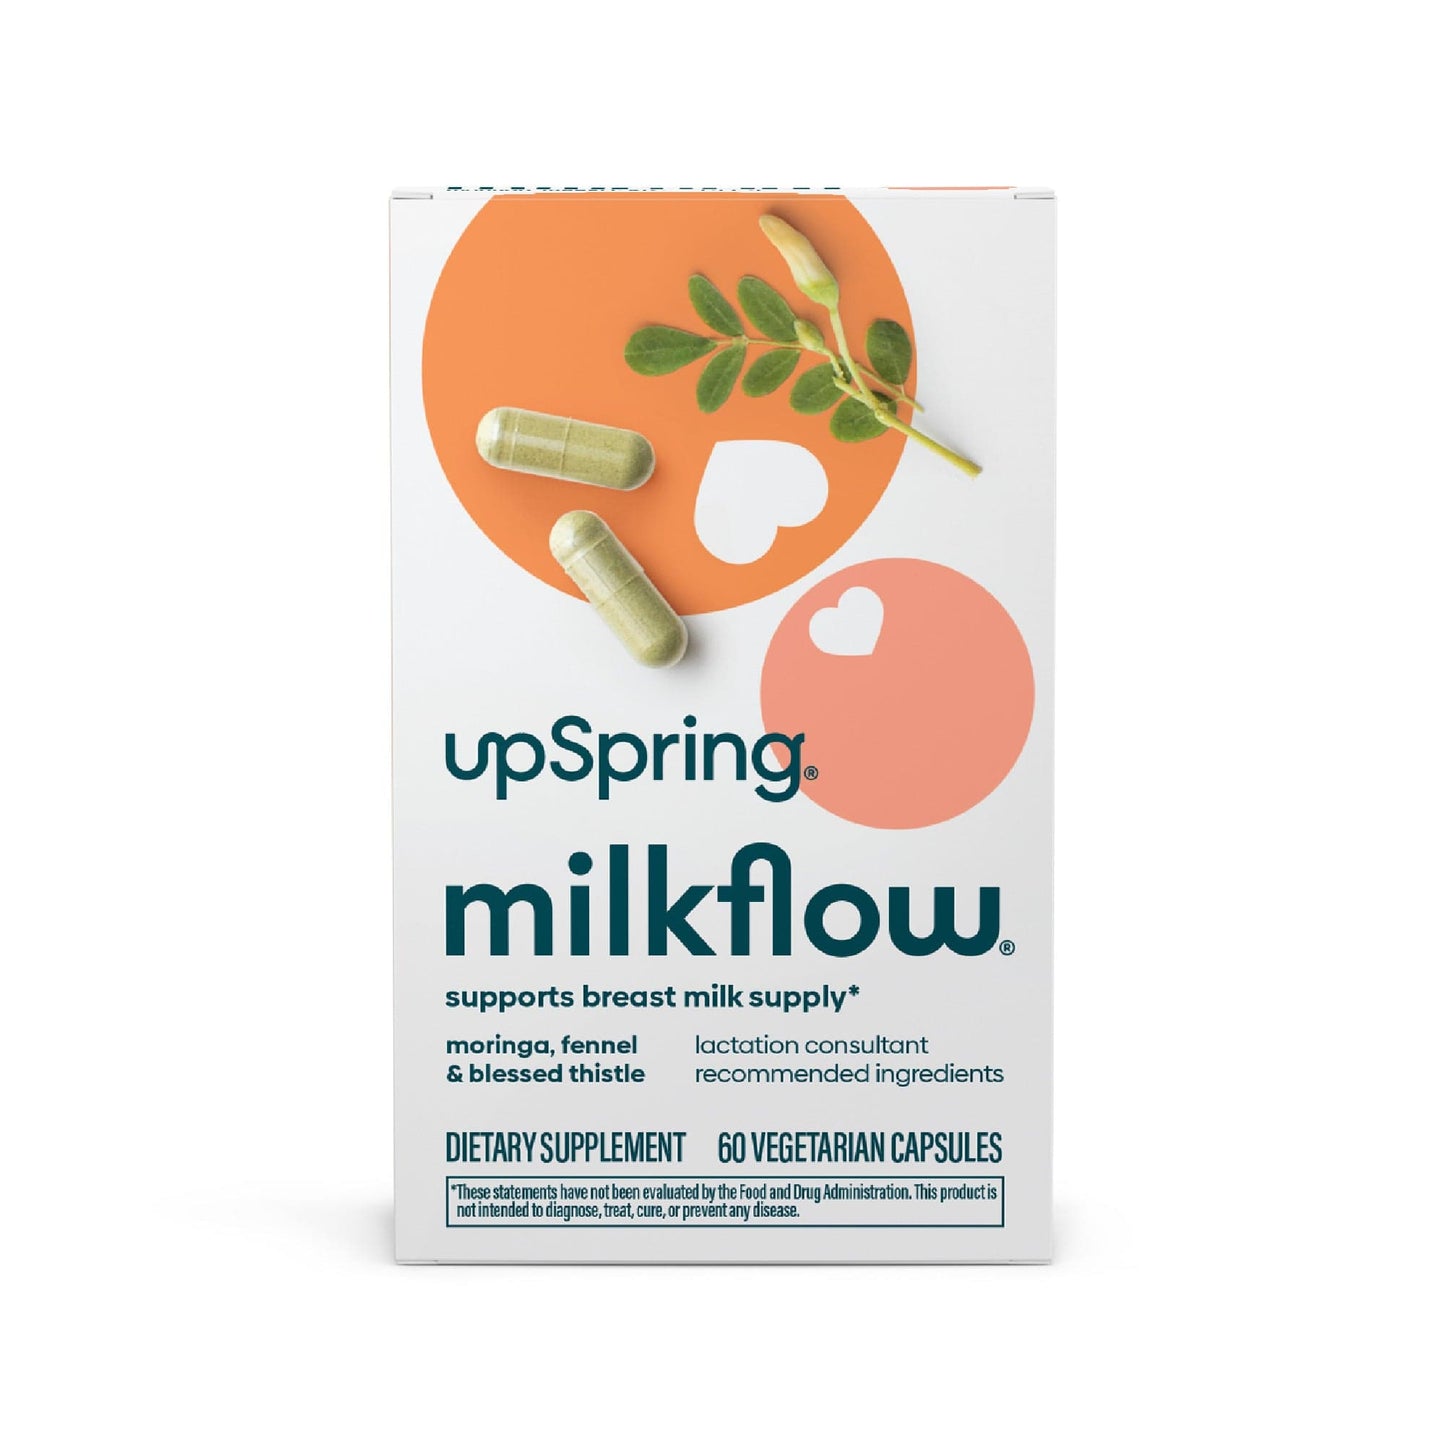 An image of the box for UpSpring MilkFlow Fenugreek Free